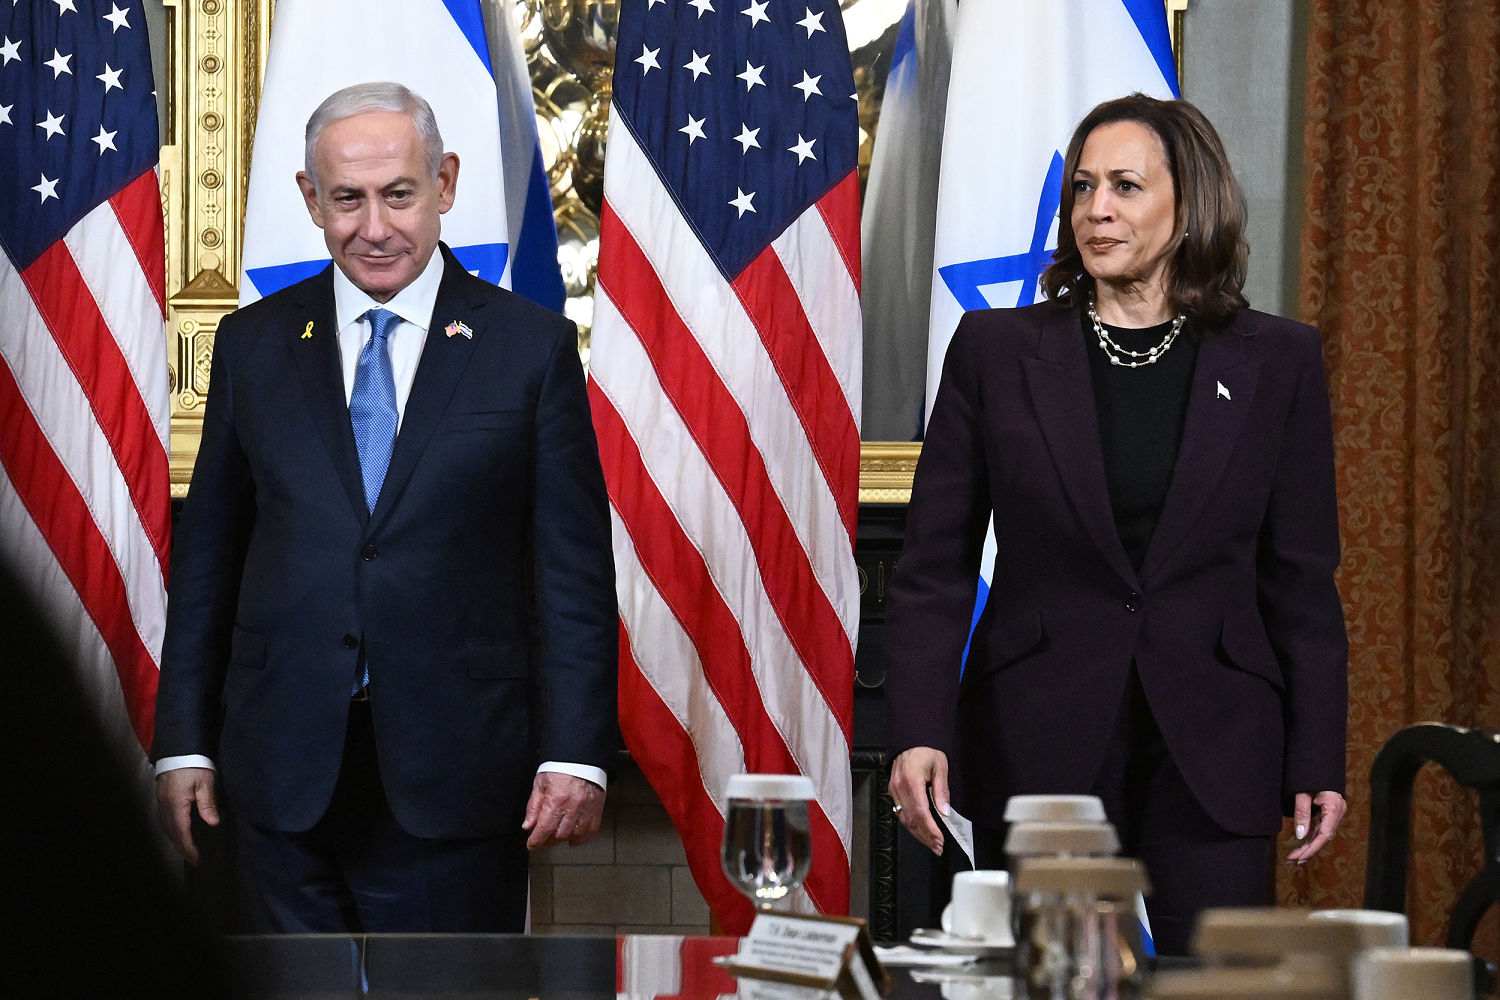 Harris could present a new challenge for Netanyahu: From the Politics Desk